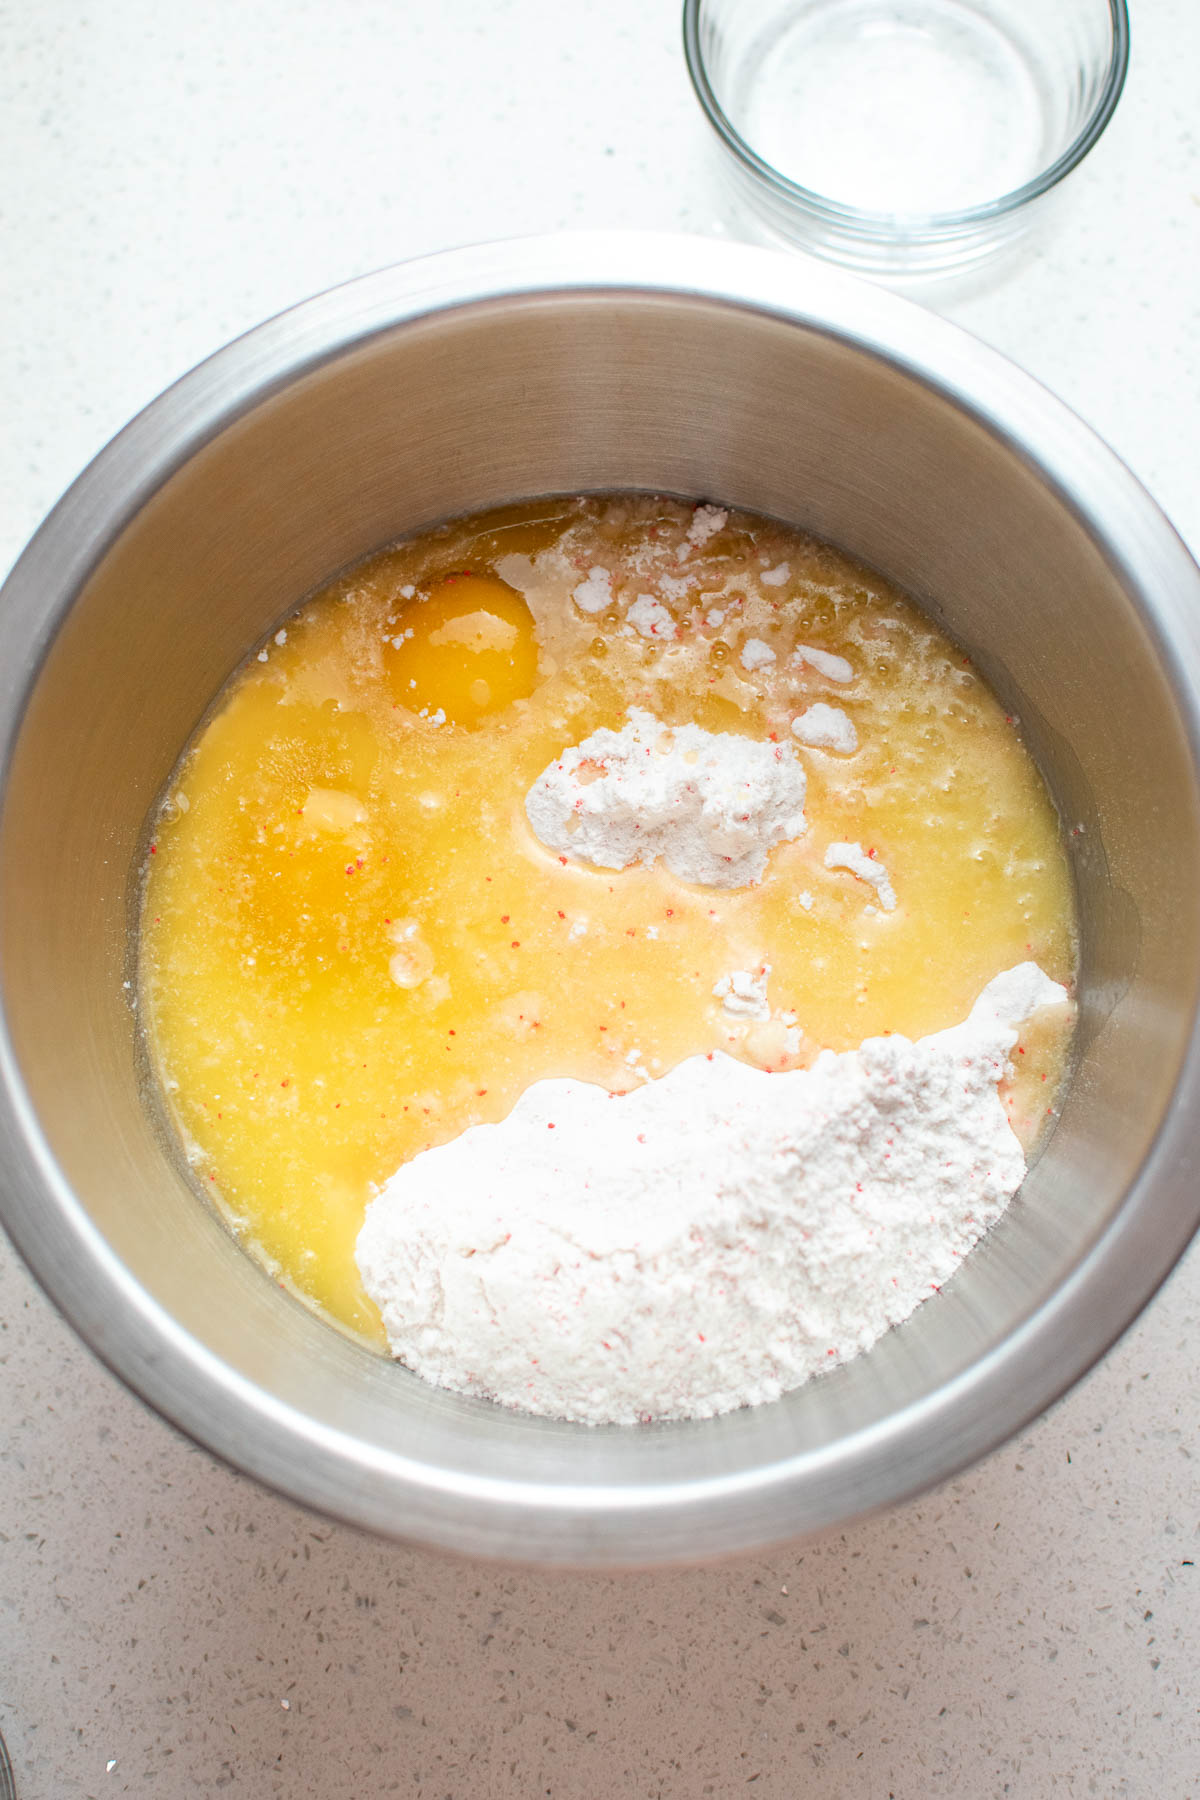 Raw eggs, melted butter, and cake mix in metal mixing bowl on quartz countertop.